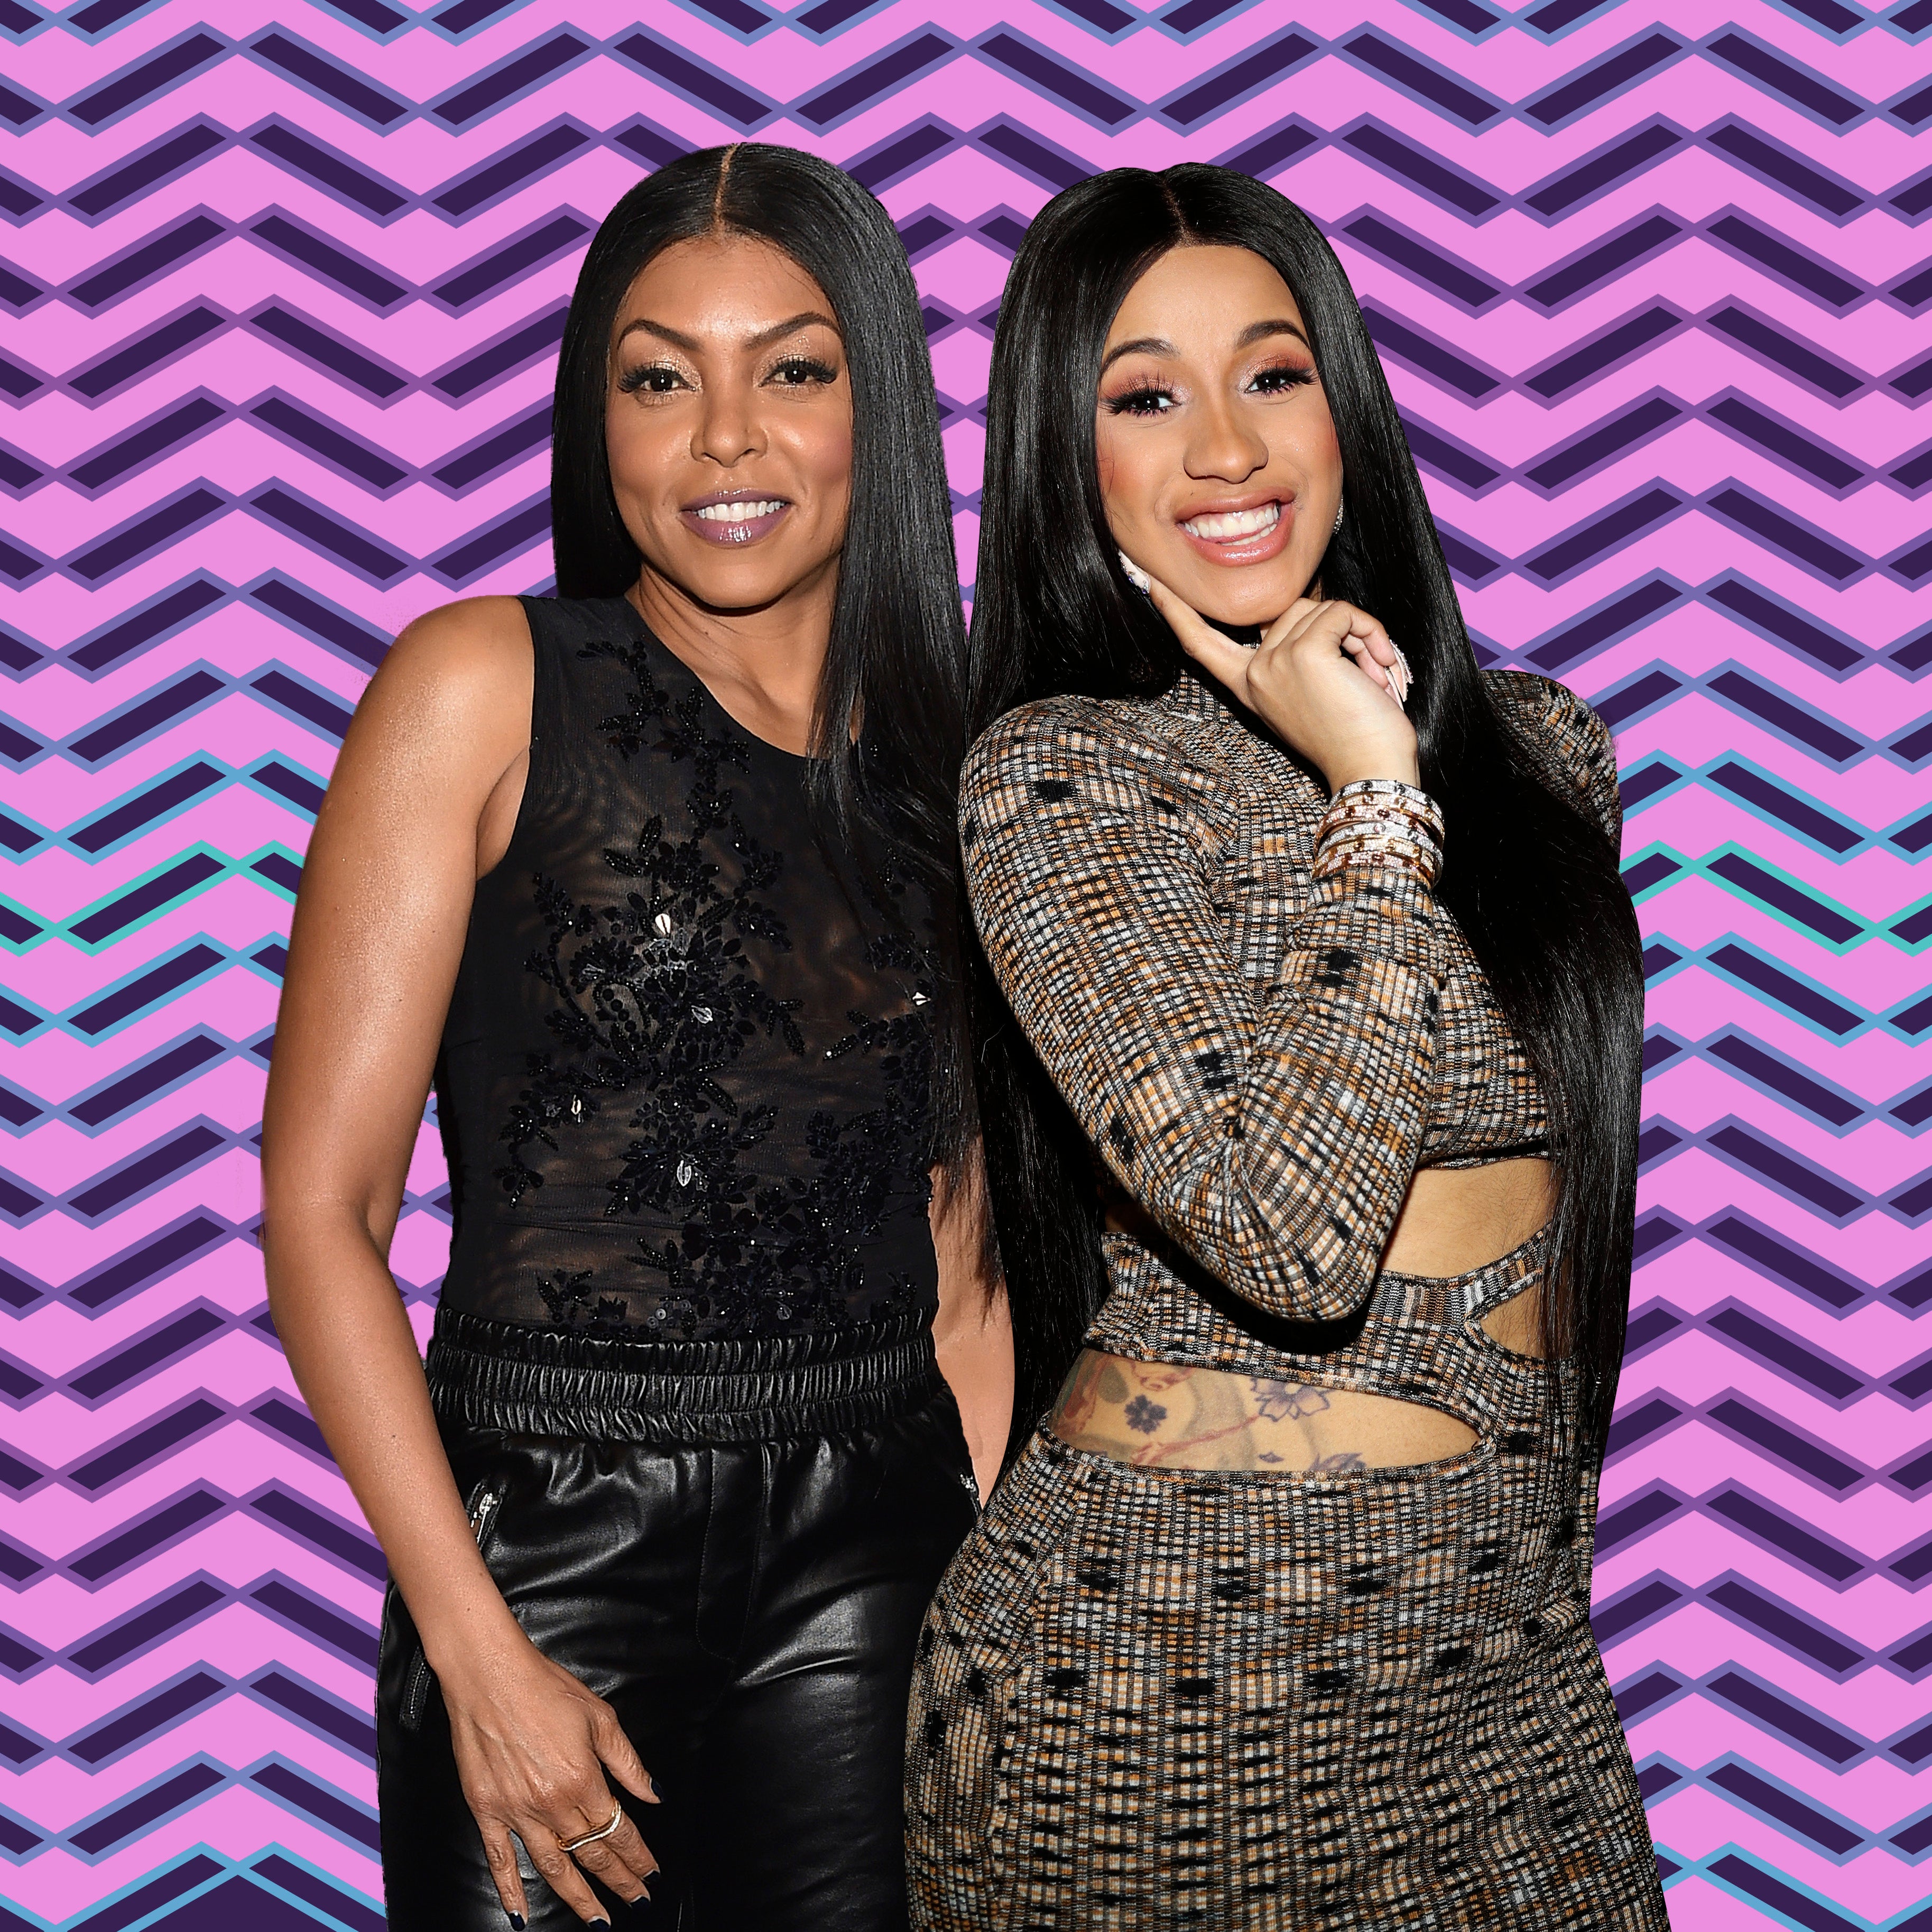 Taraji P. Henson Says She Identifies With Cardi B In Essay For TIME's 100 Most Influential List
